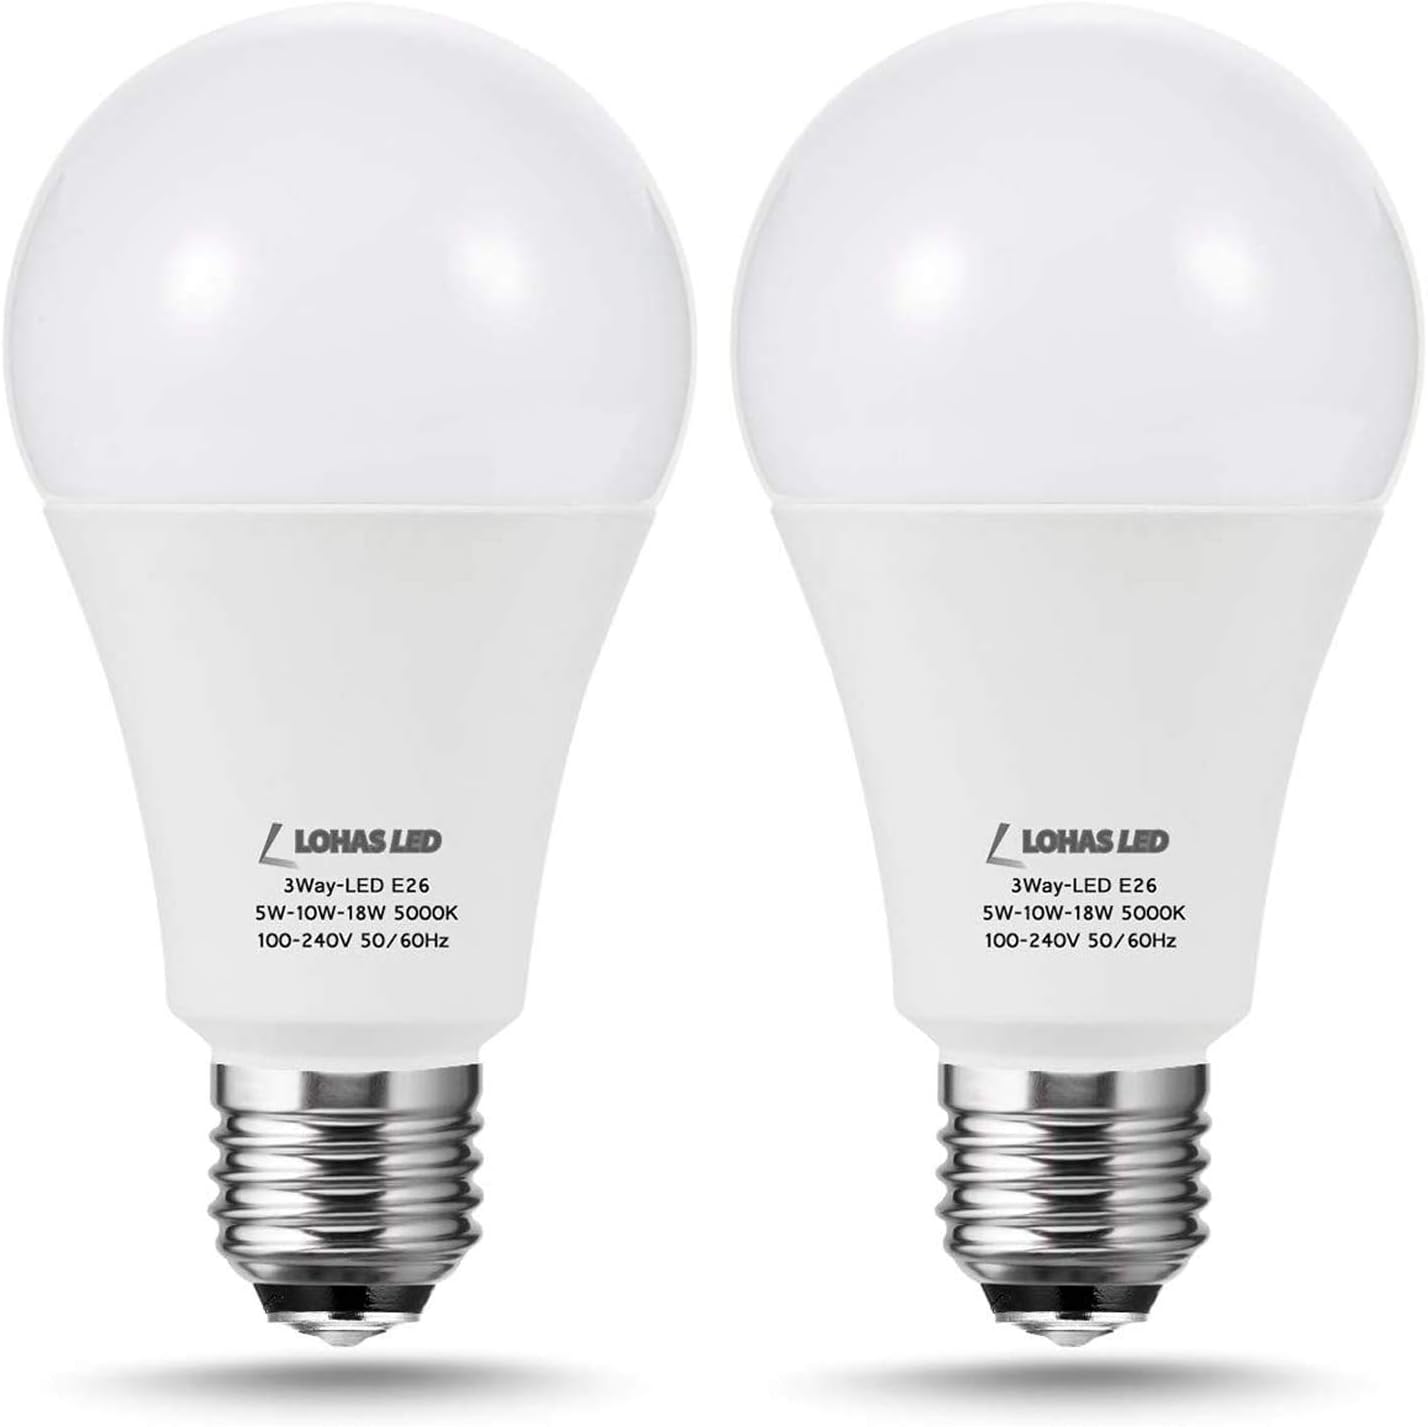 What Is A 3-Way LED Bulb